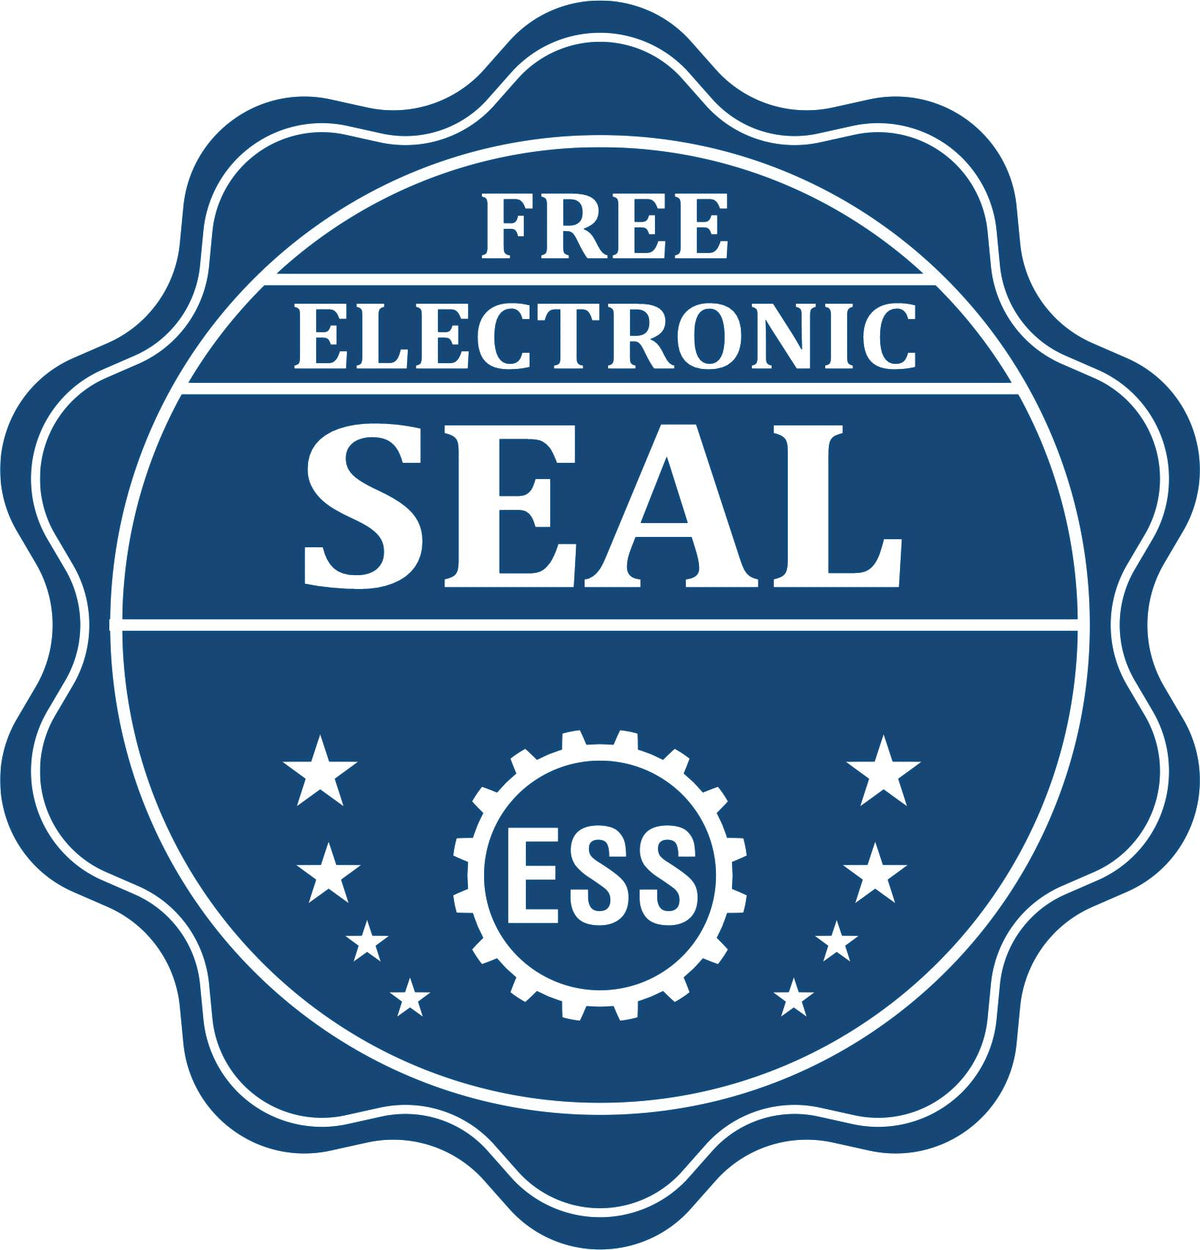 A badge showing a free electronic seal for the Hybrid New York Architect Seal with stars and the ESS gear on the emblem.